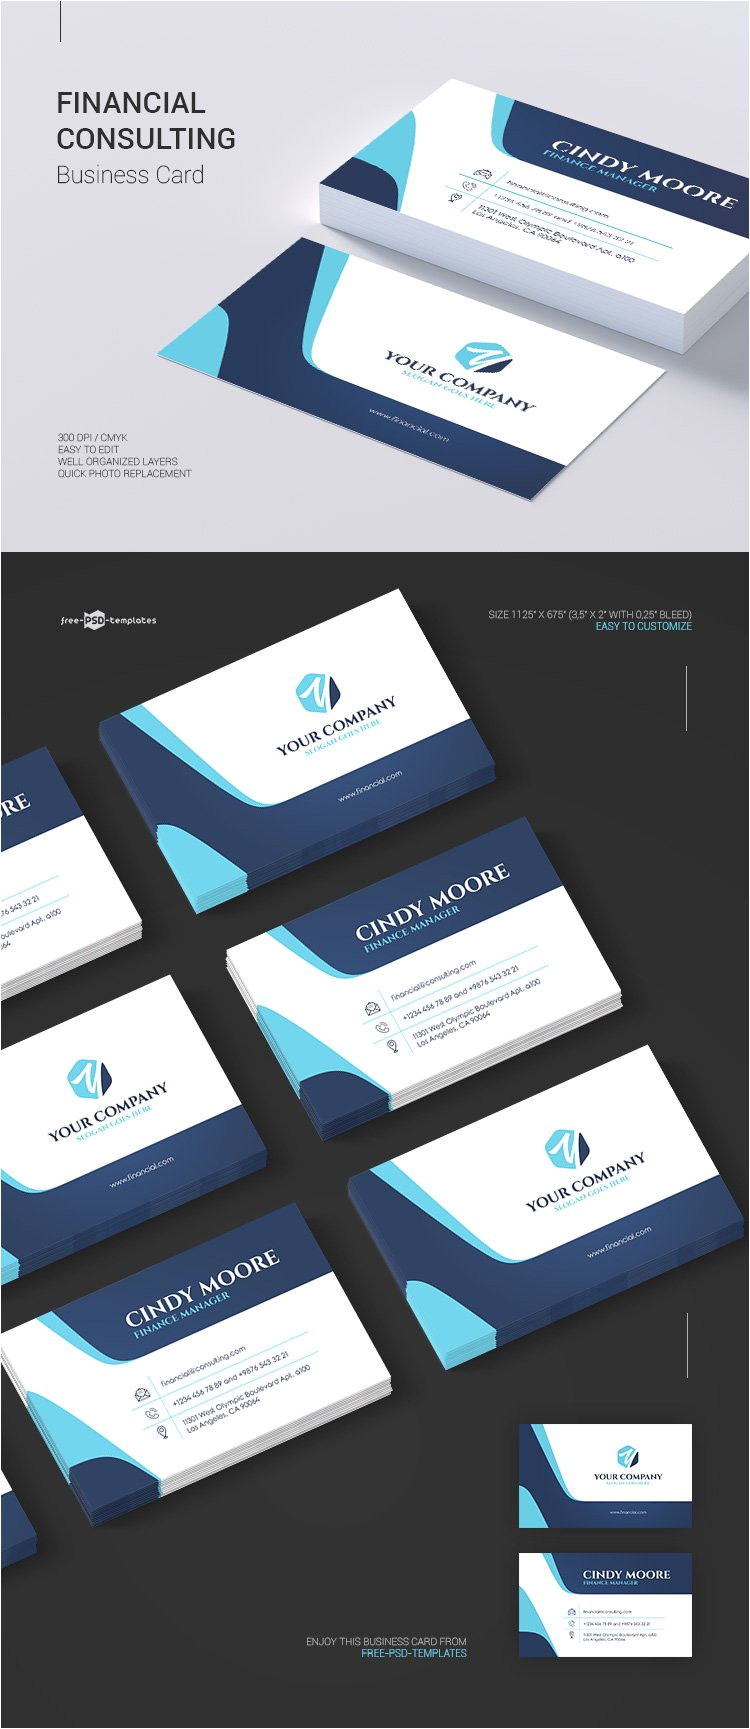 preview business card 1 free financial consulting business card in psd jpg